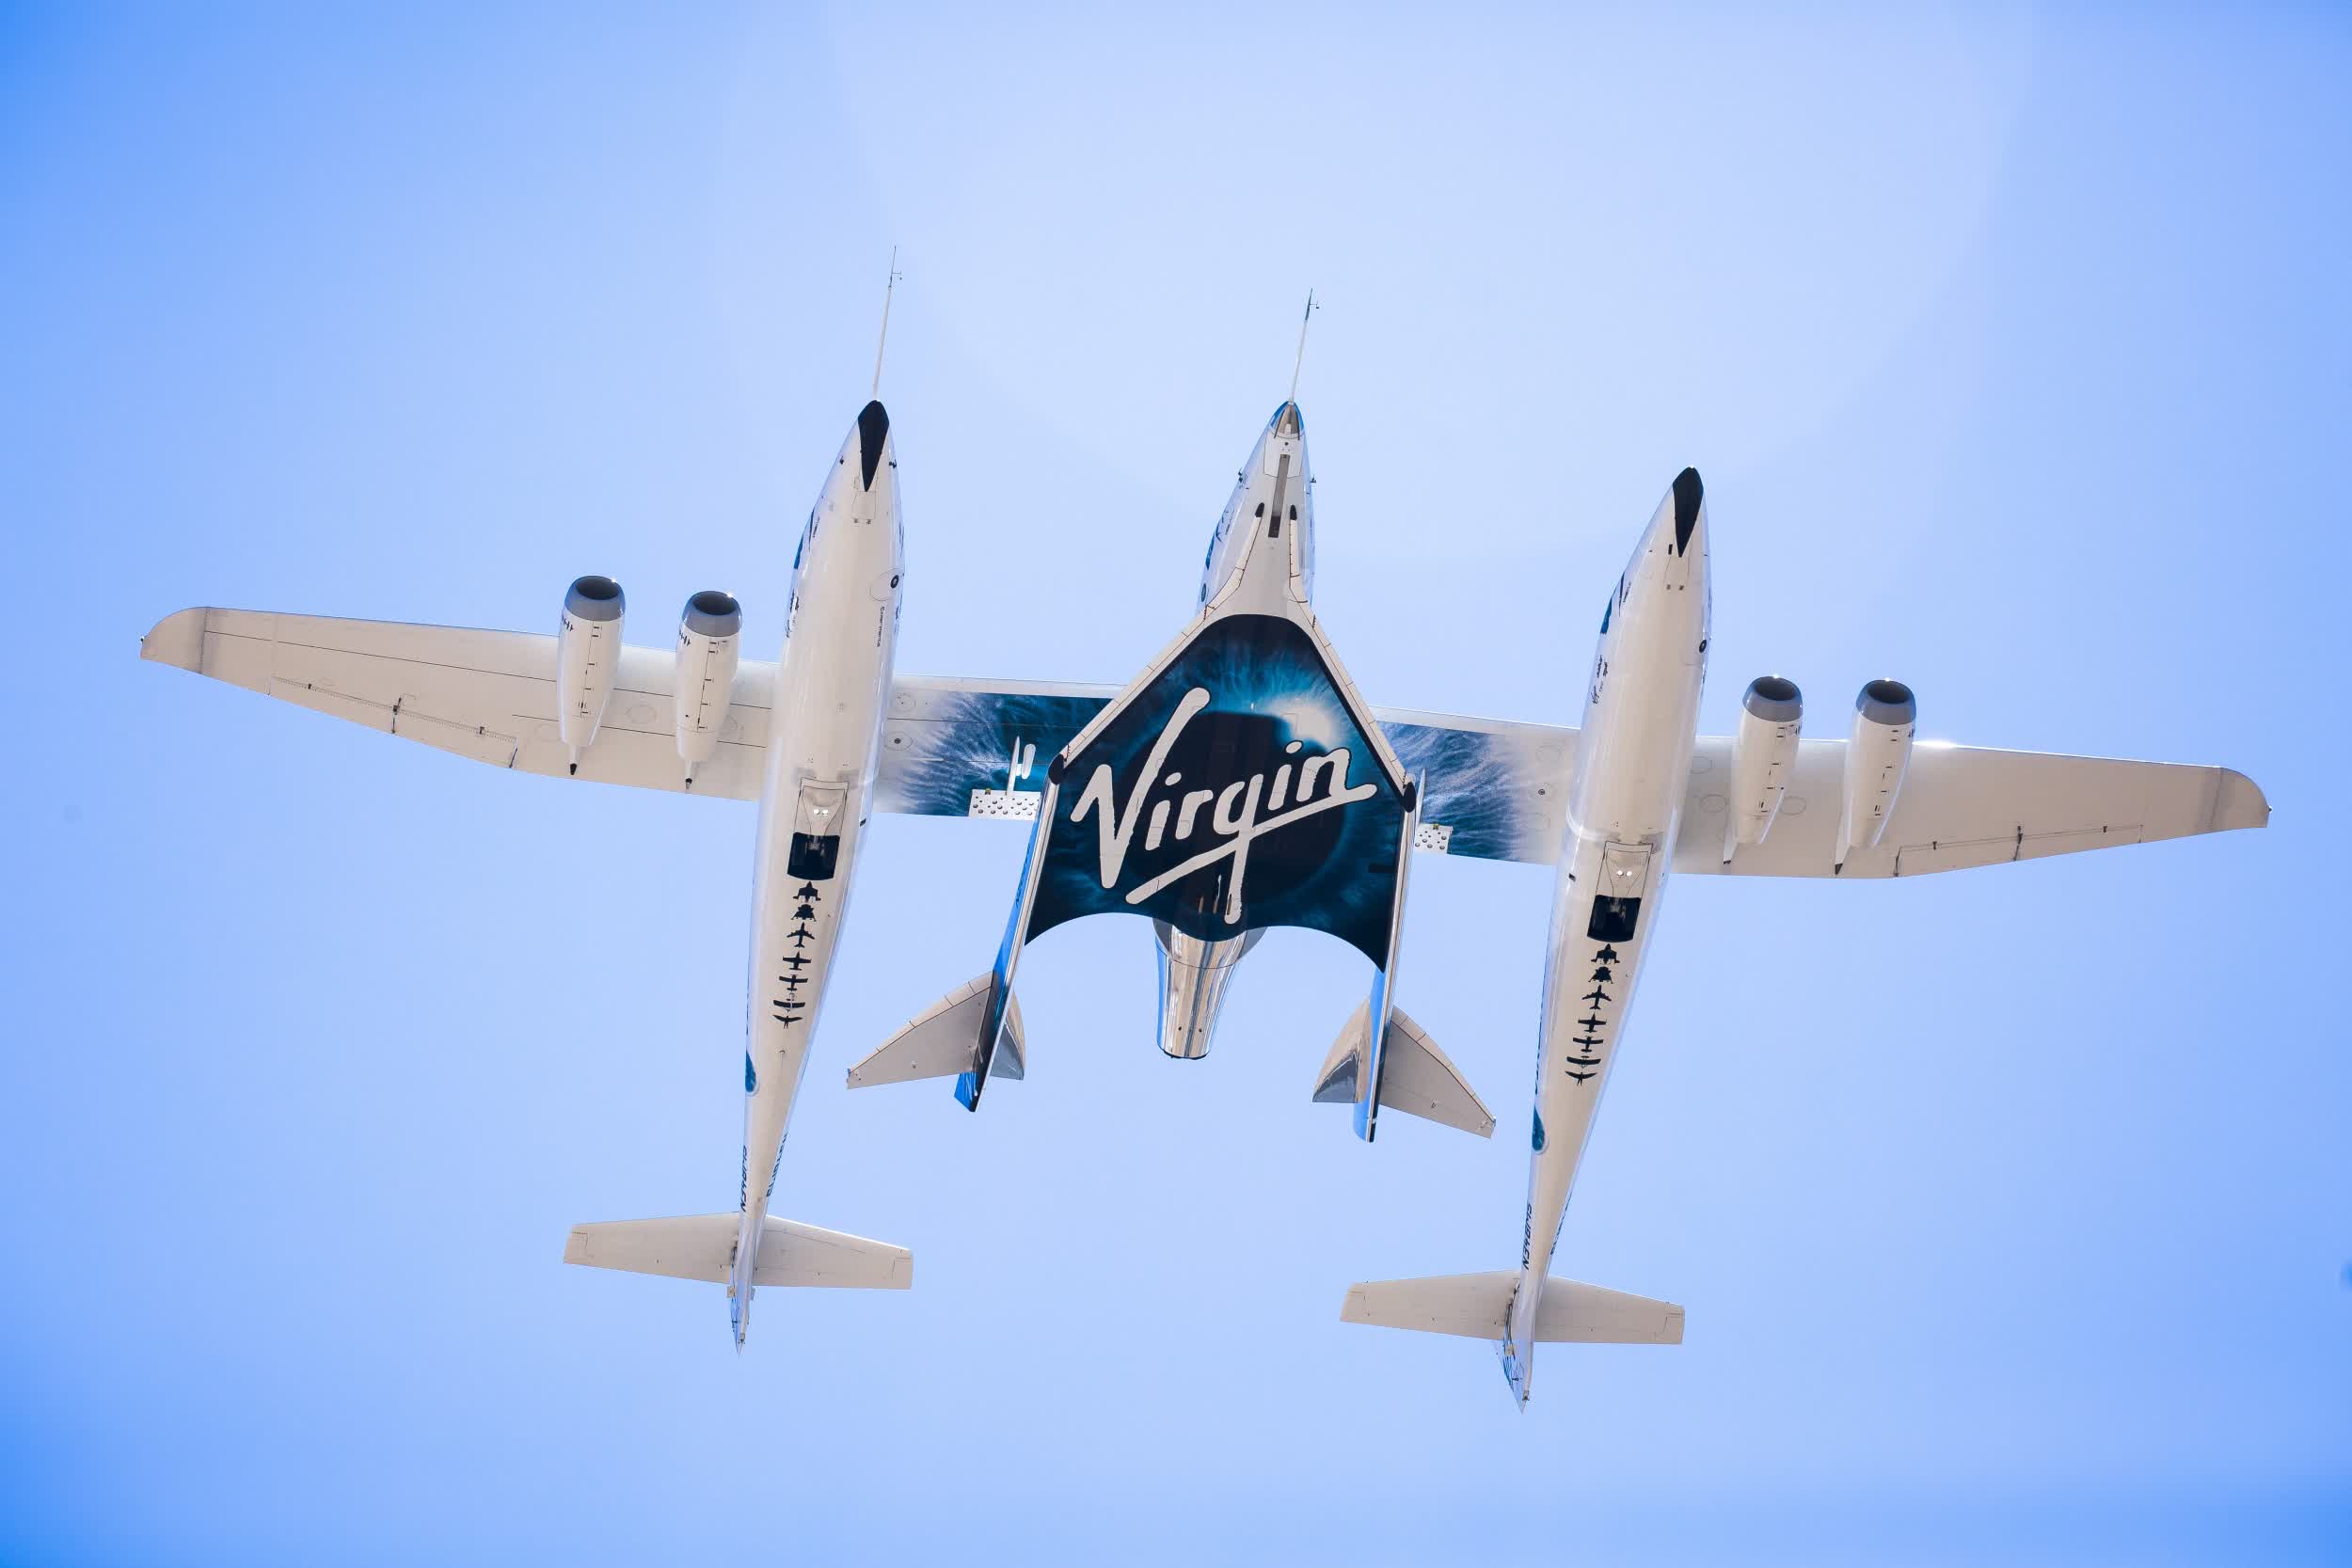 Virgin Galactic first commercial spaceflight is taking place later this month